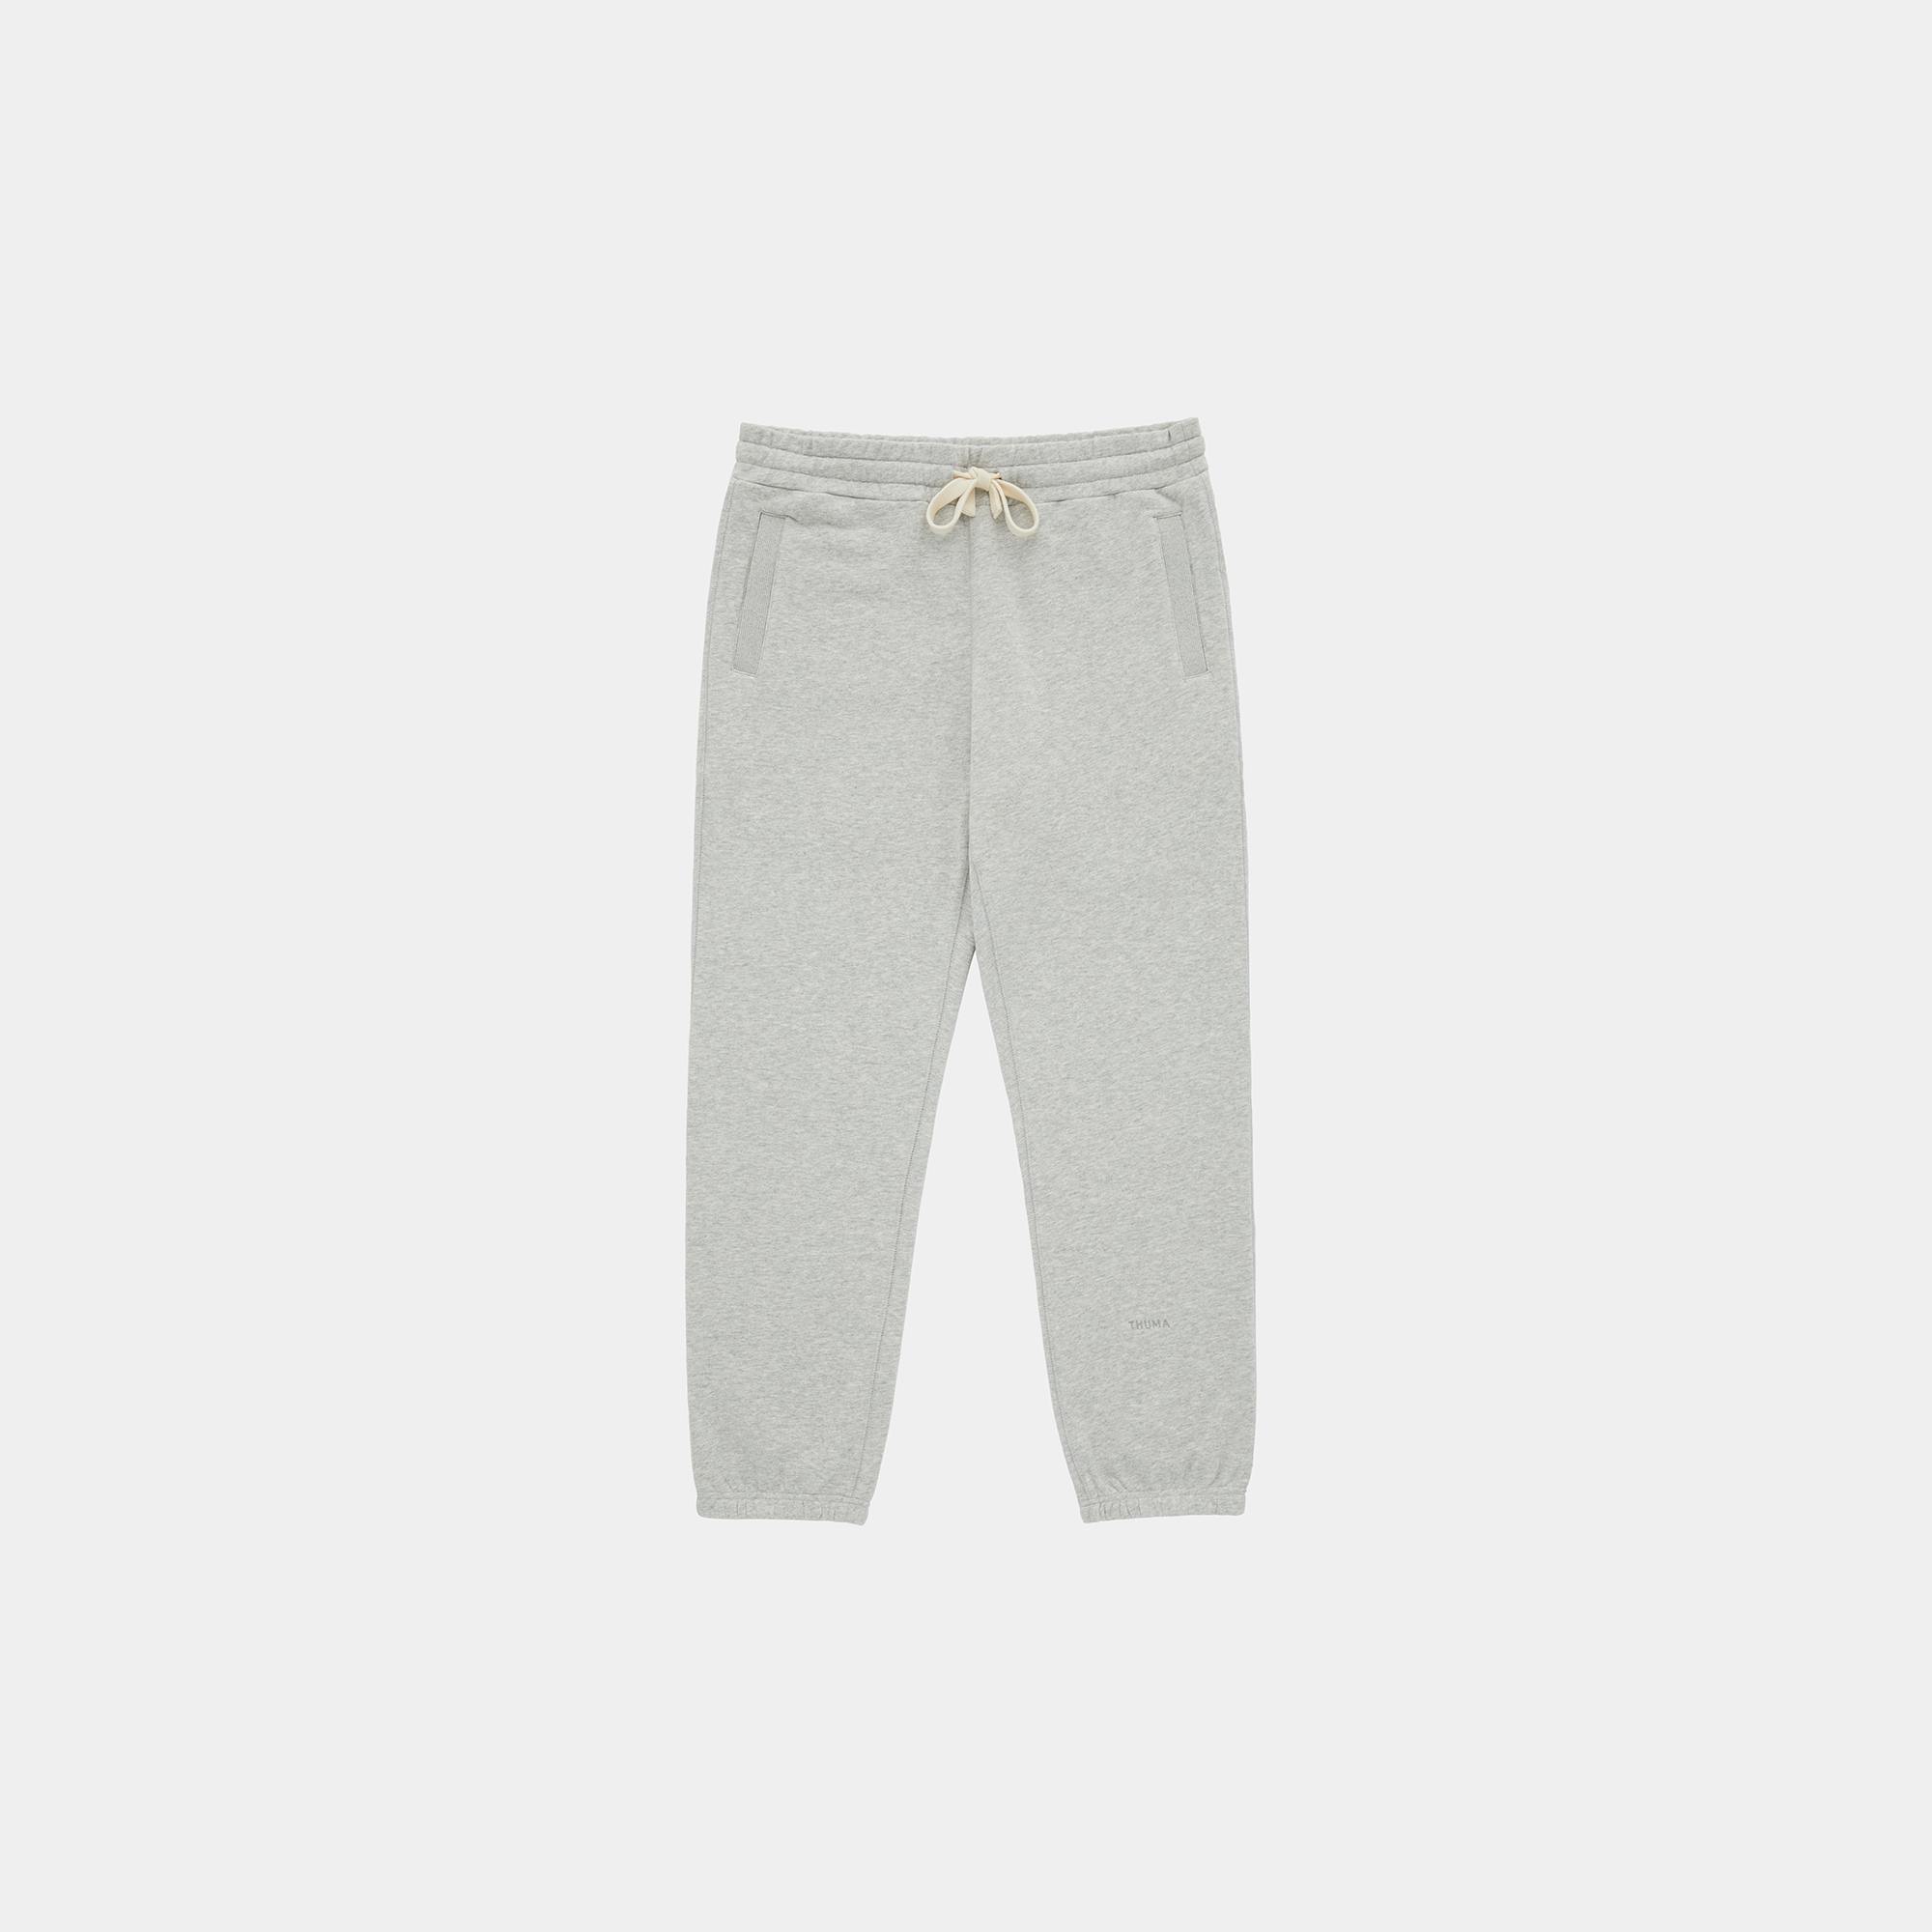 Lound Leisure Sweatpants in Grey for Women